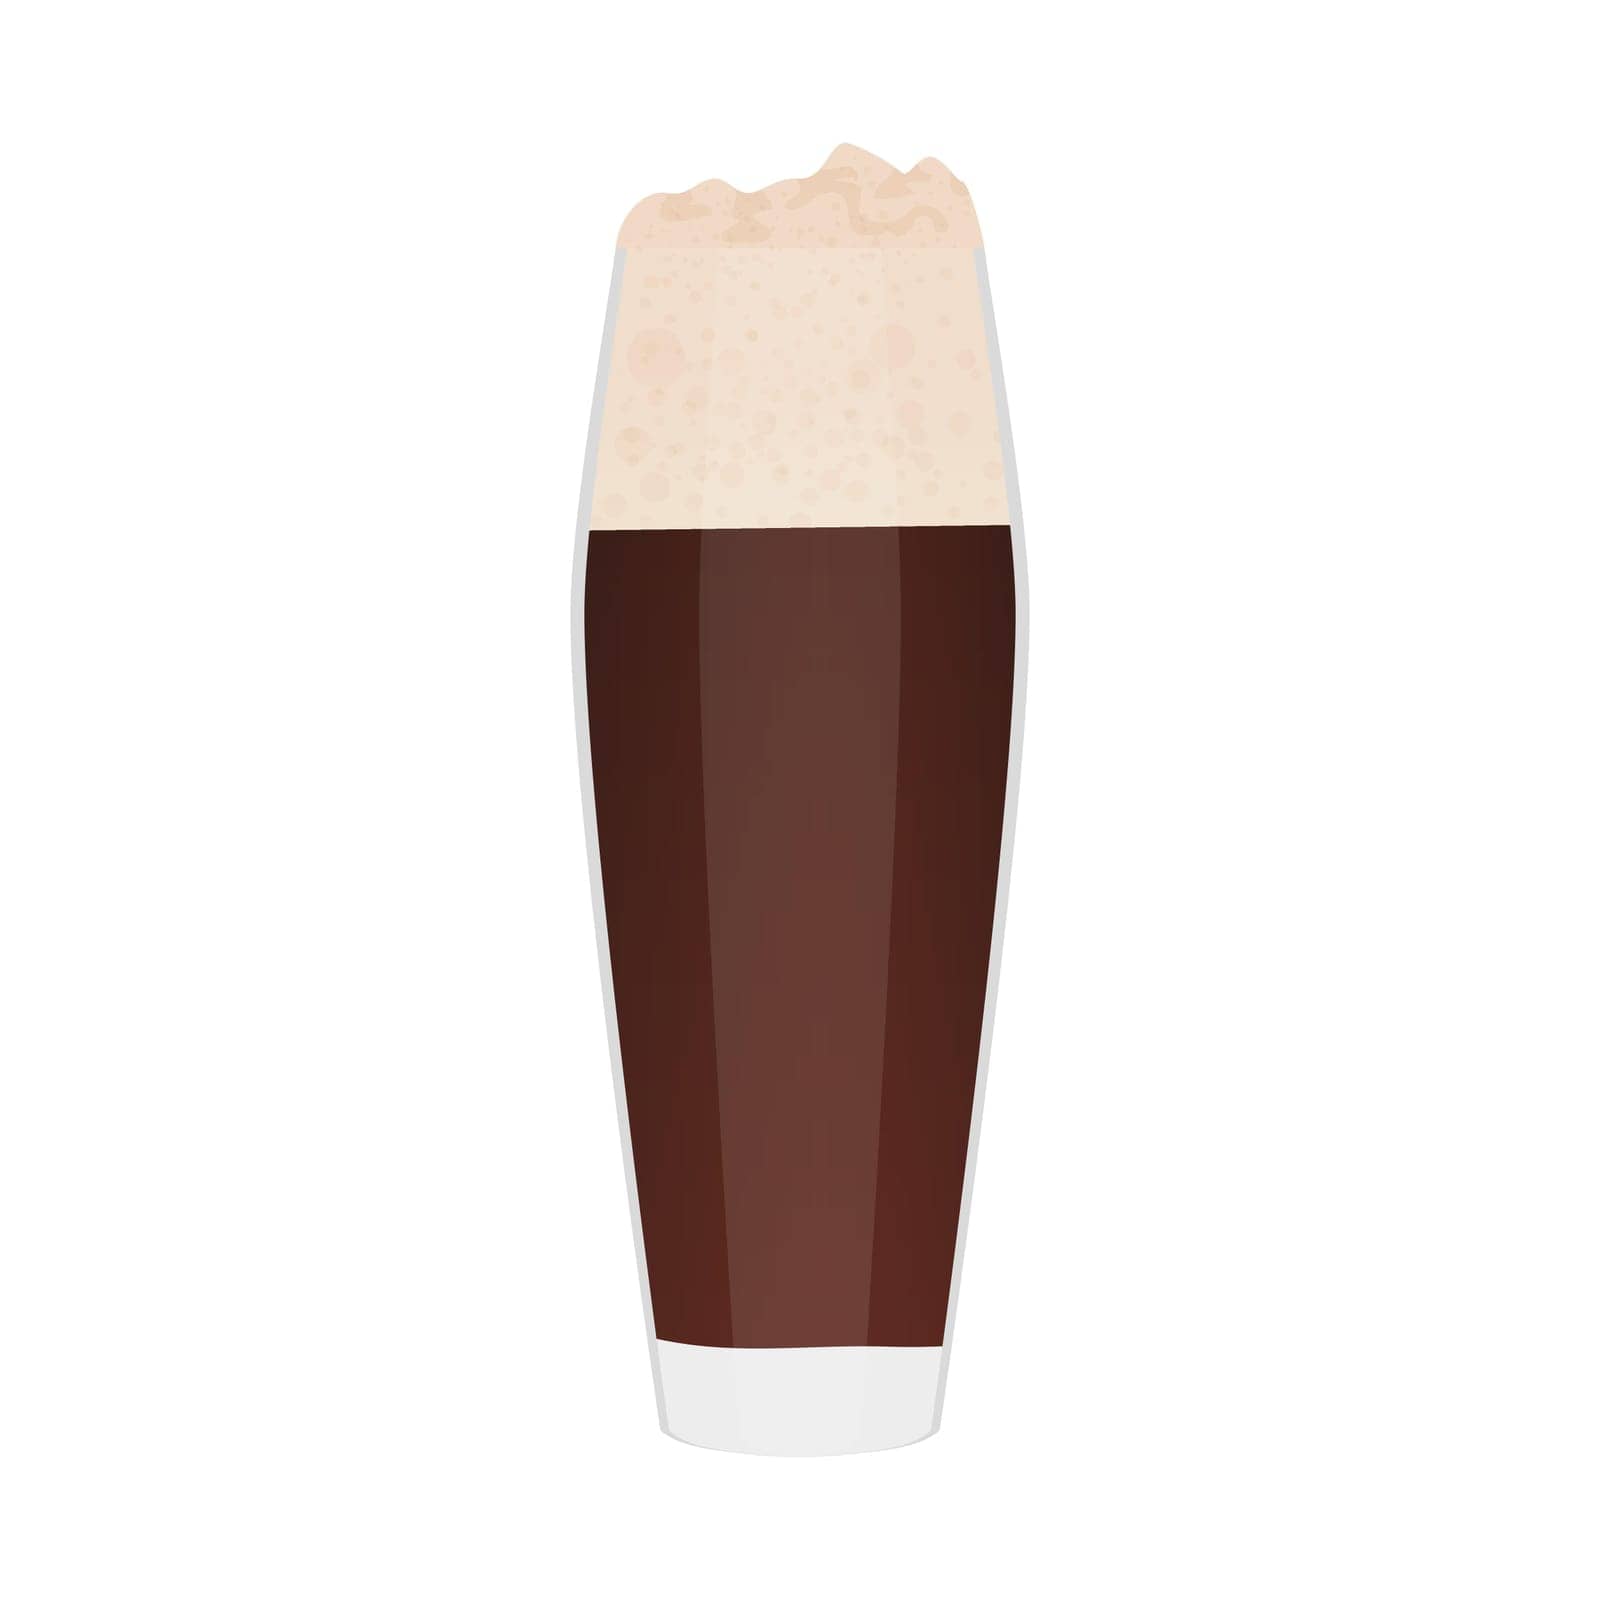 Beer glass, clear tall cup of dark brown beer with froth for party in pub vector illustration